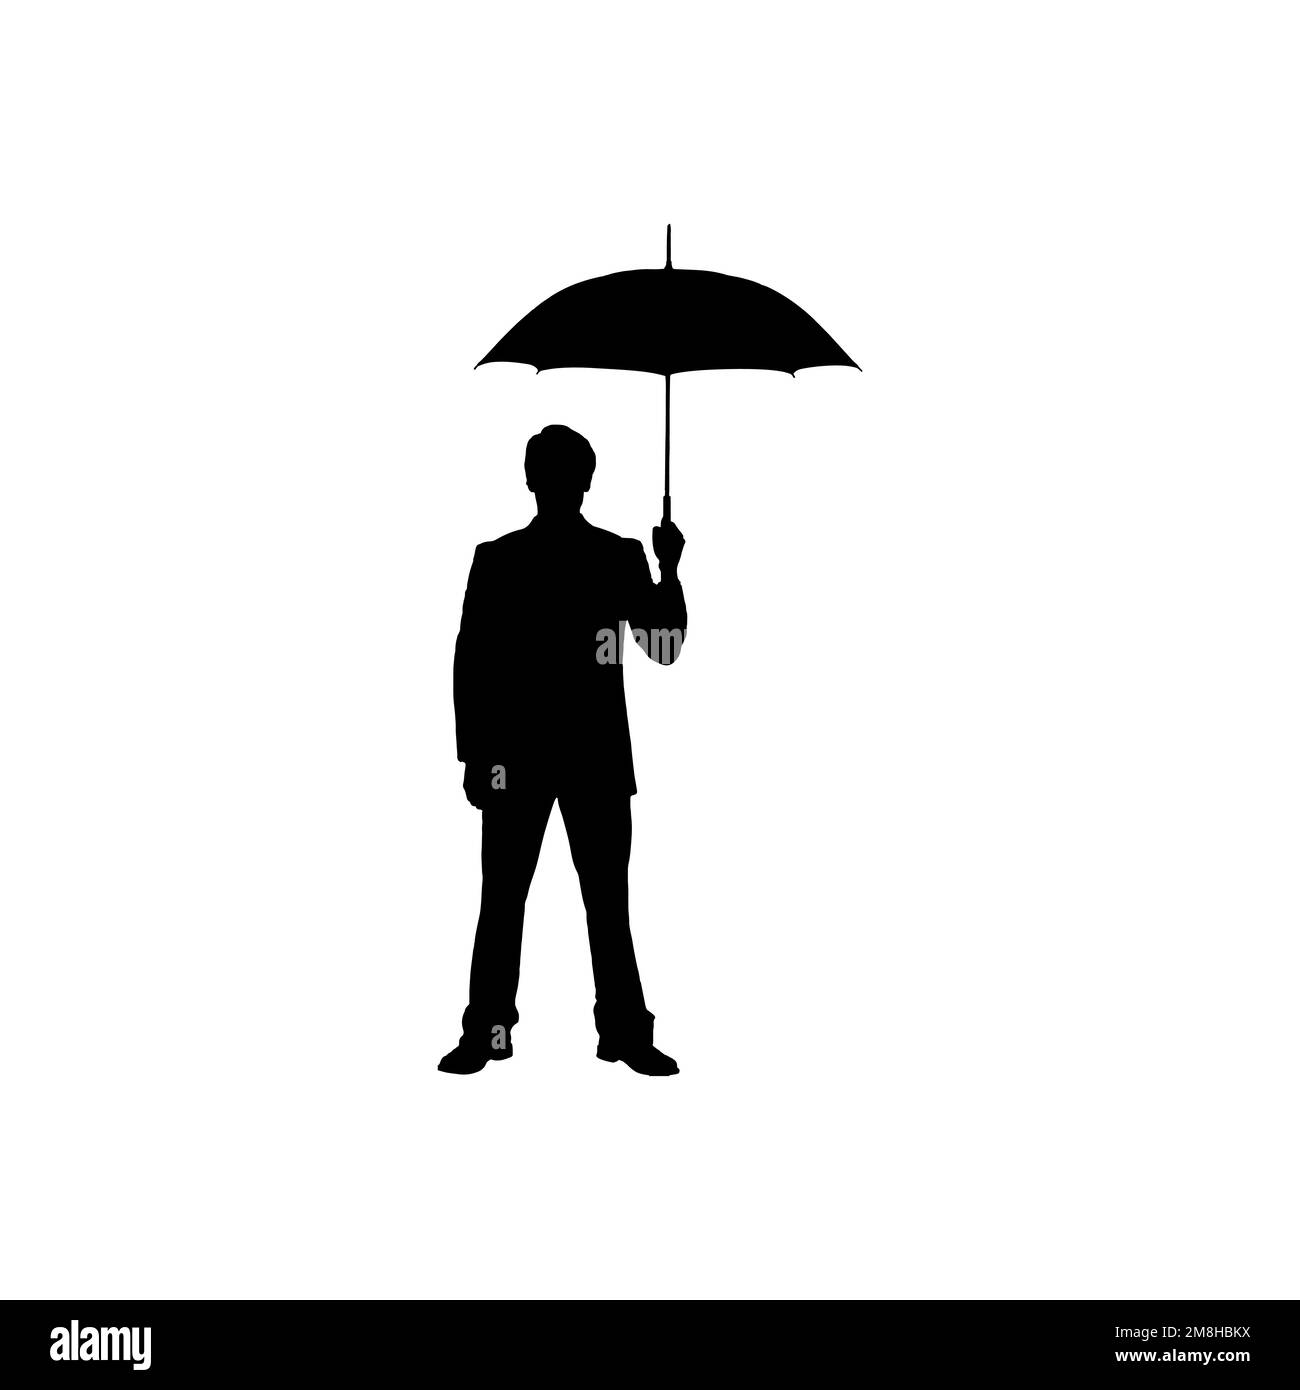 The man with the umbrella icon. Simple style insurance big sale poster background symbol. brand logo design element. Stock Vector